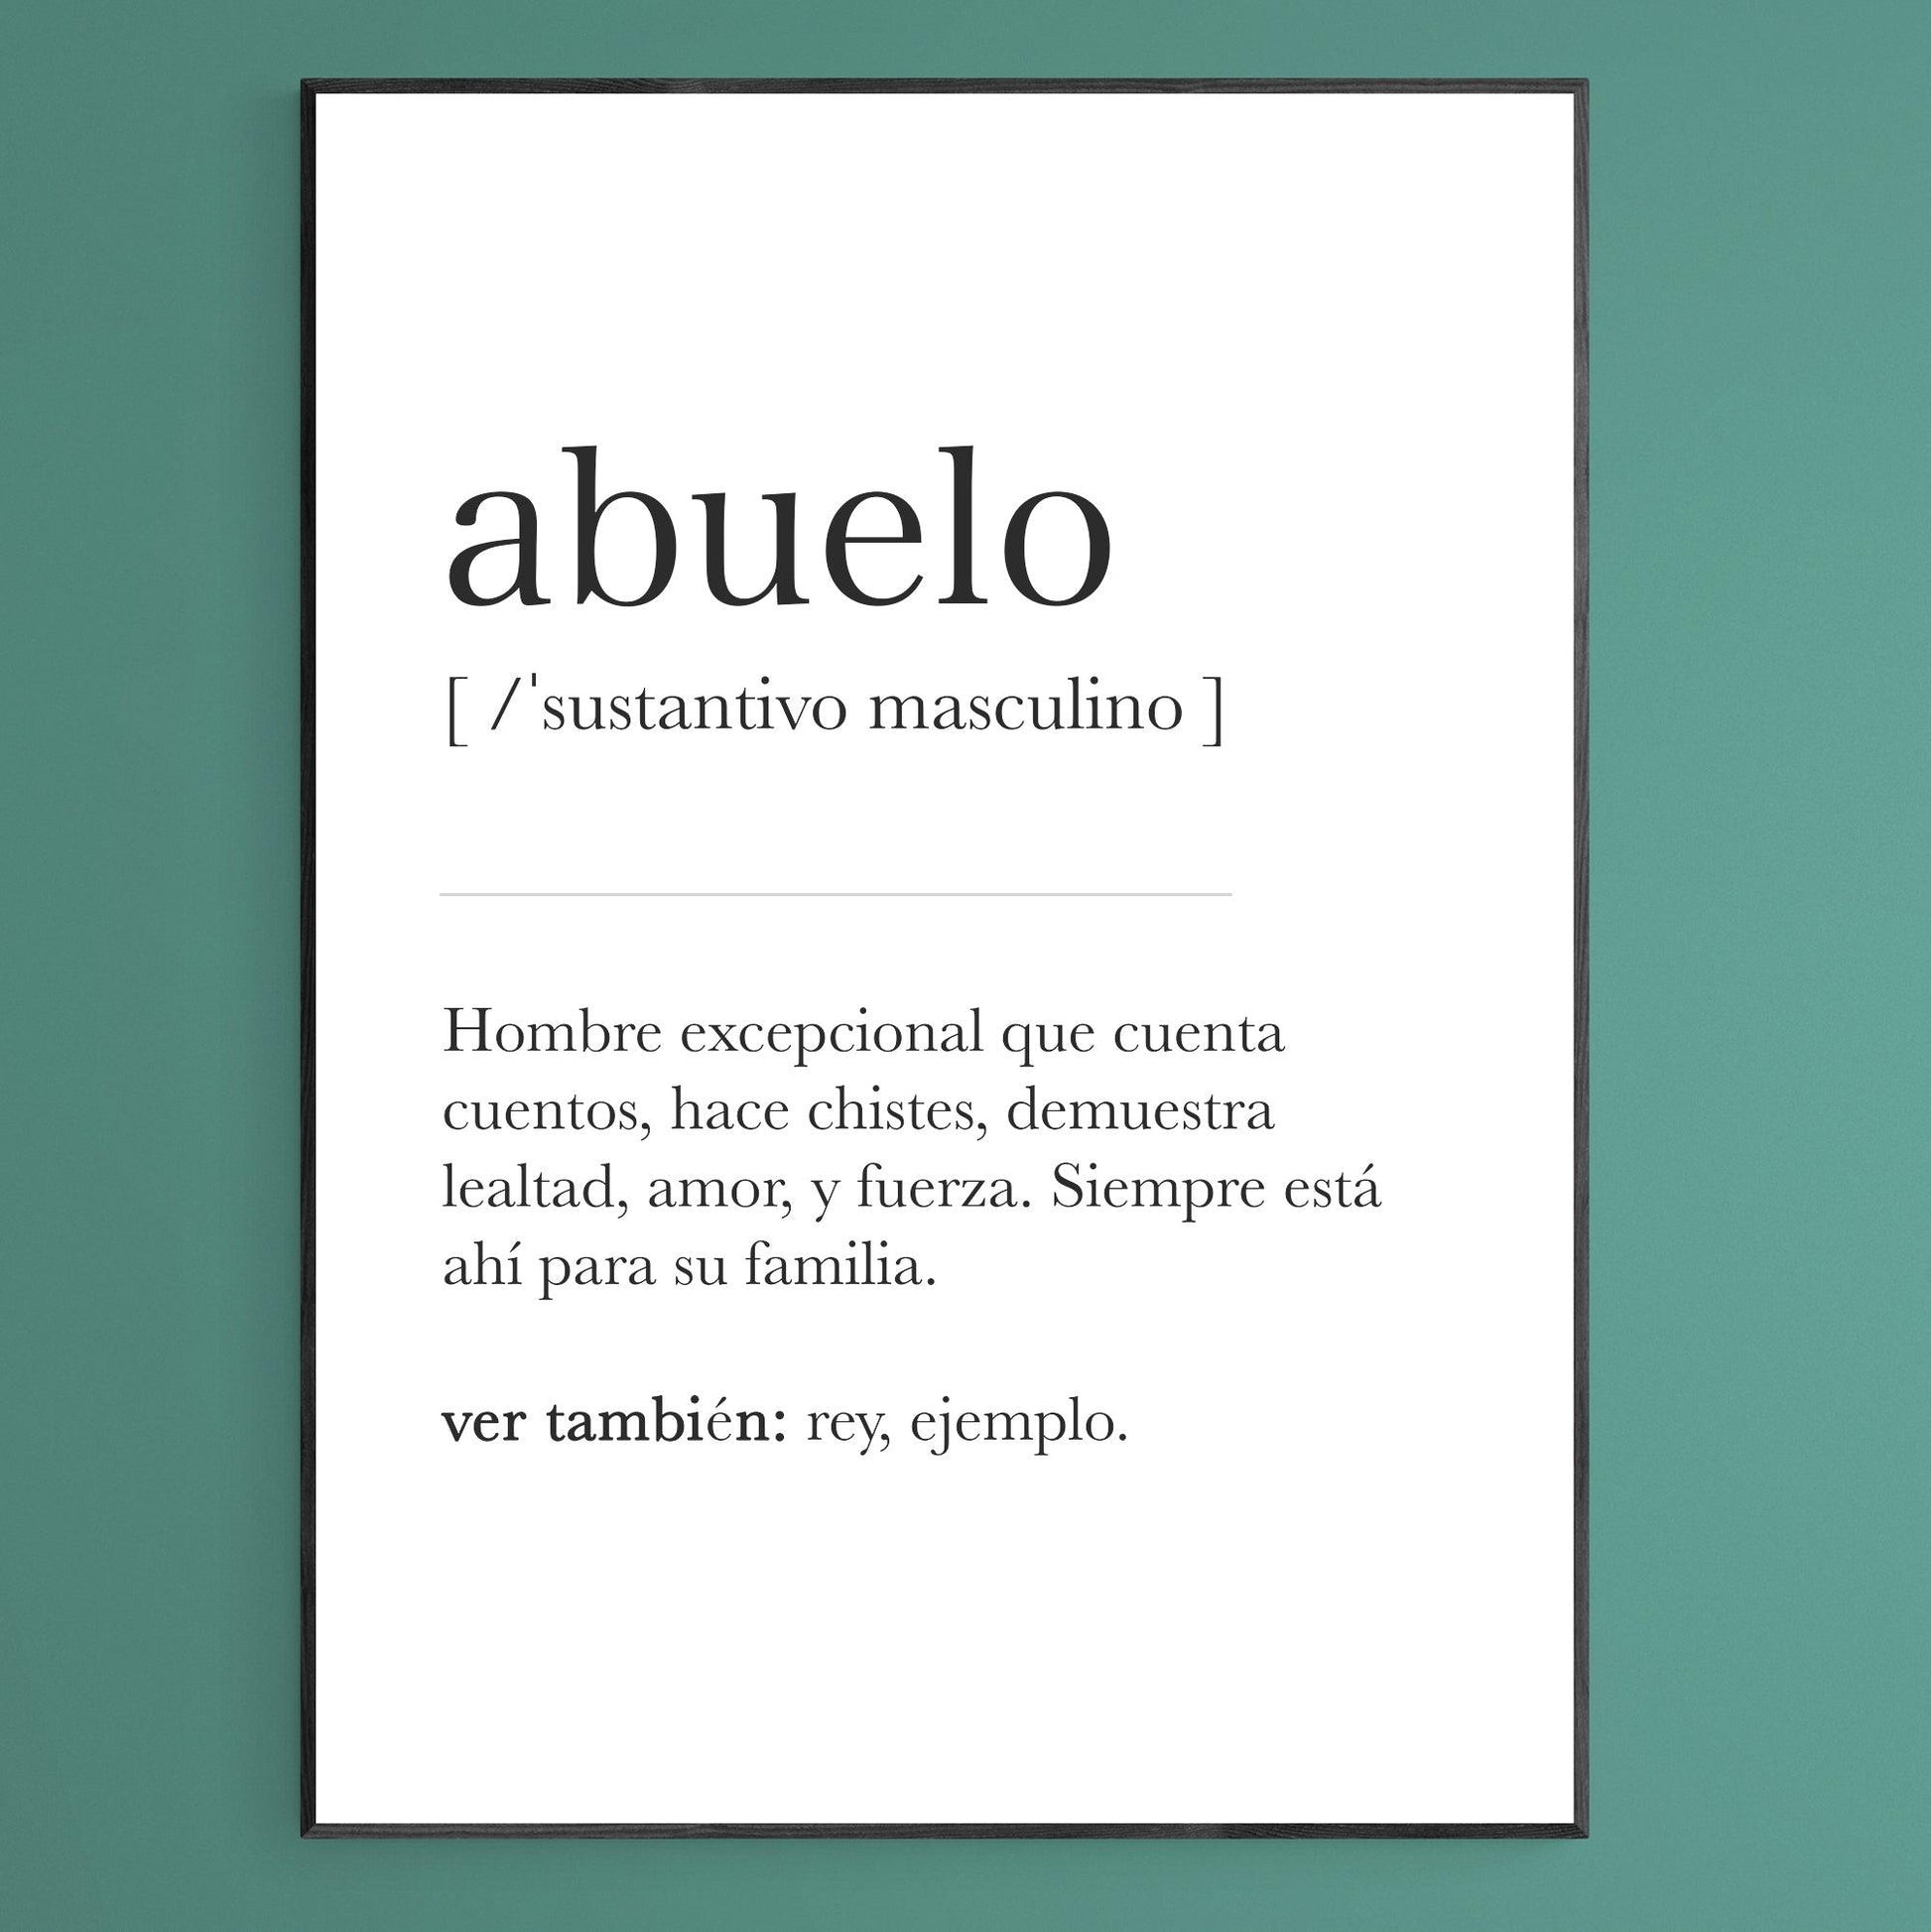 Abuelo Definition Print, Dictionary Art, Definition Meaning Print Quote, Motivational Poster Wall Art Decor, Best Gift For Best Friend